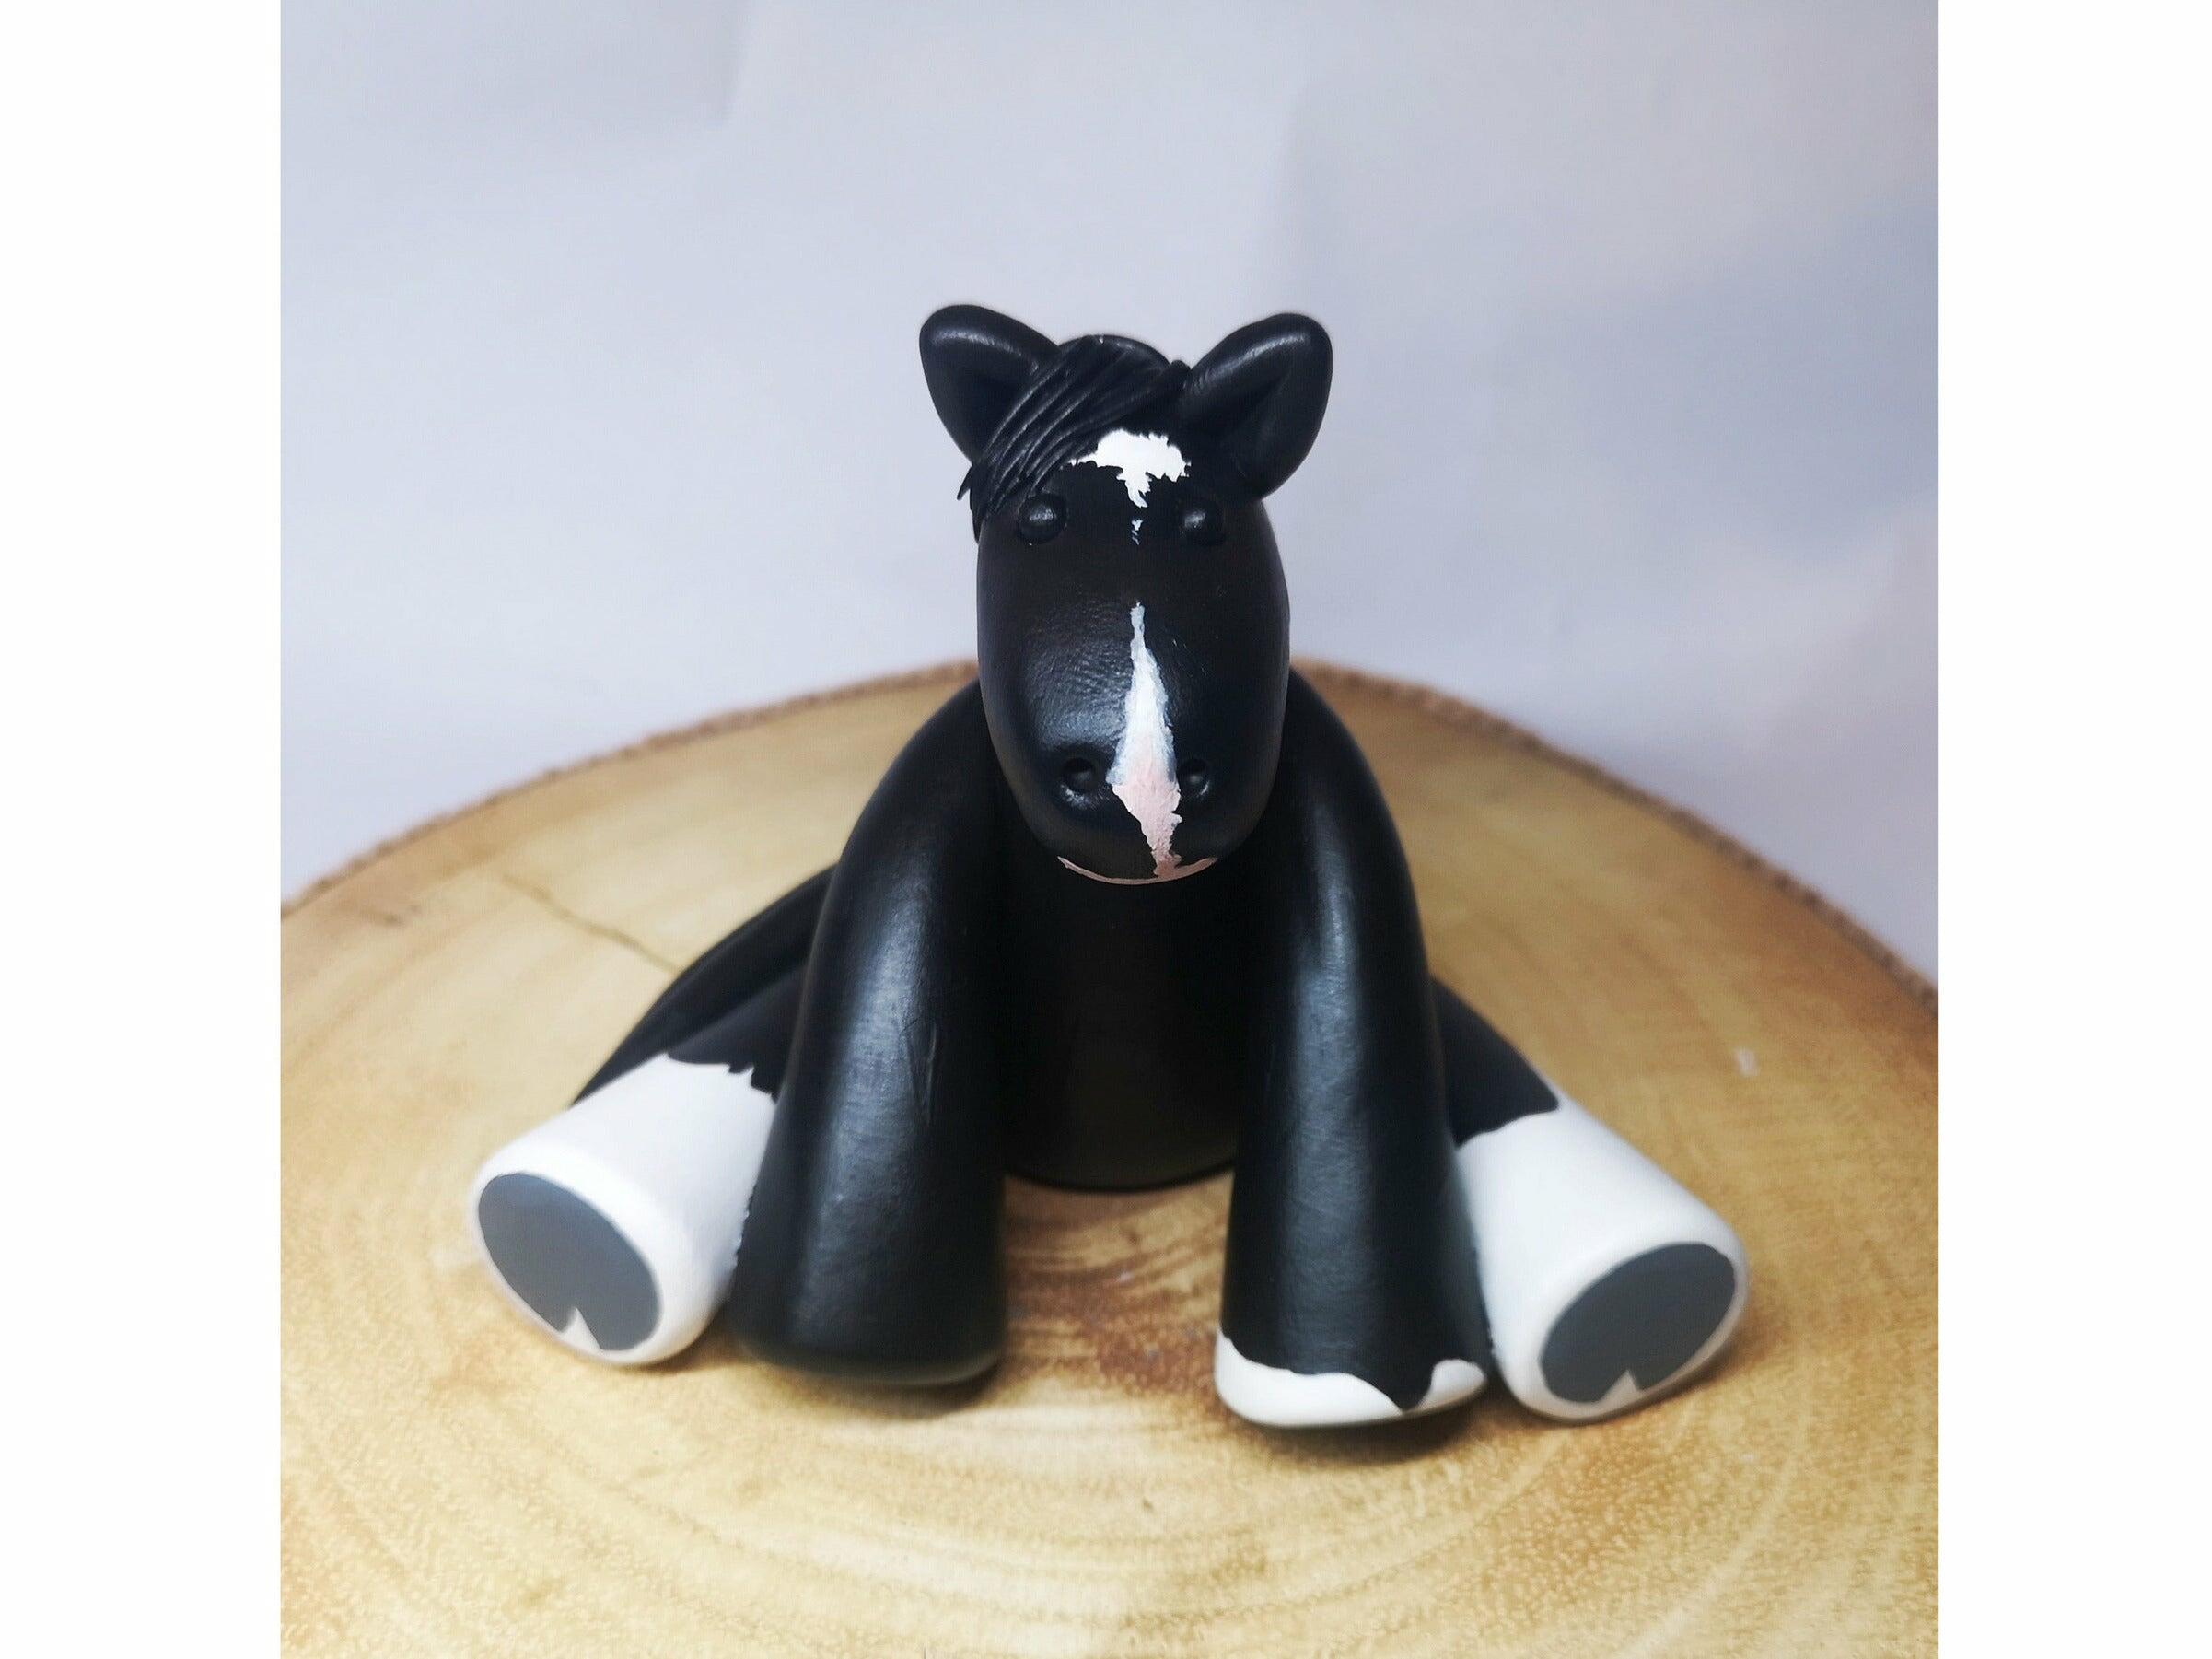 A clay model of a gypsy cob painted in black and white